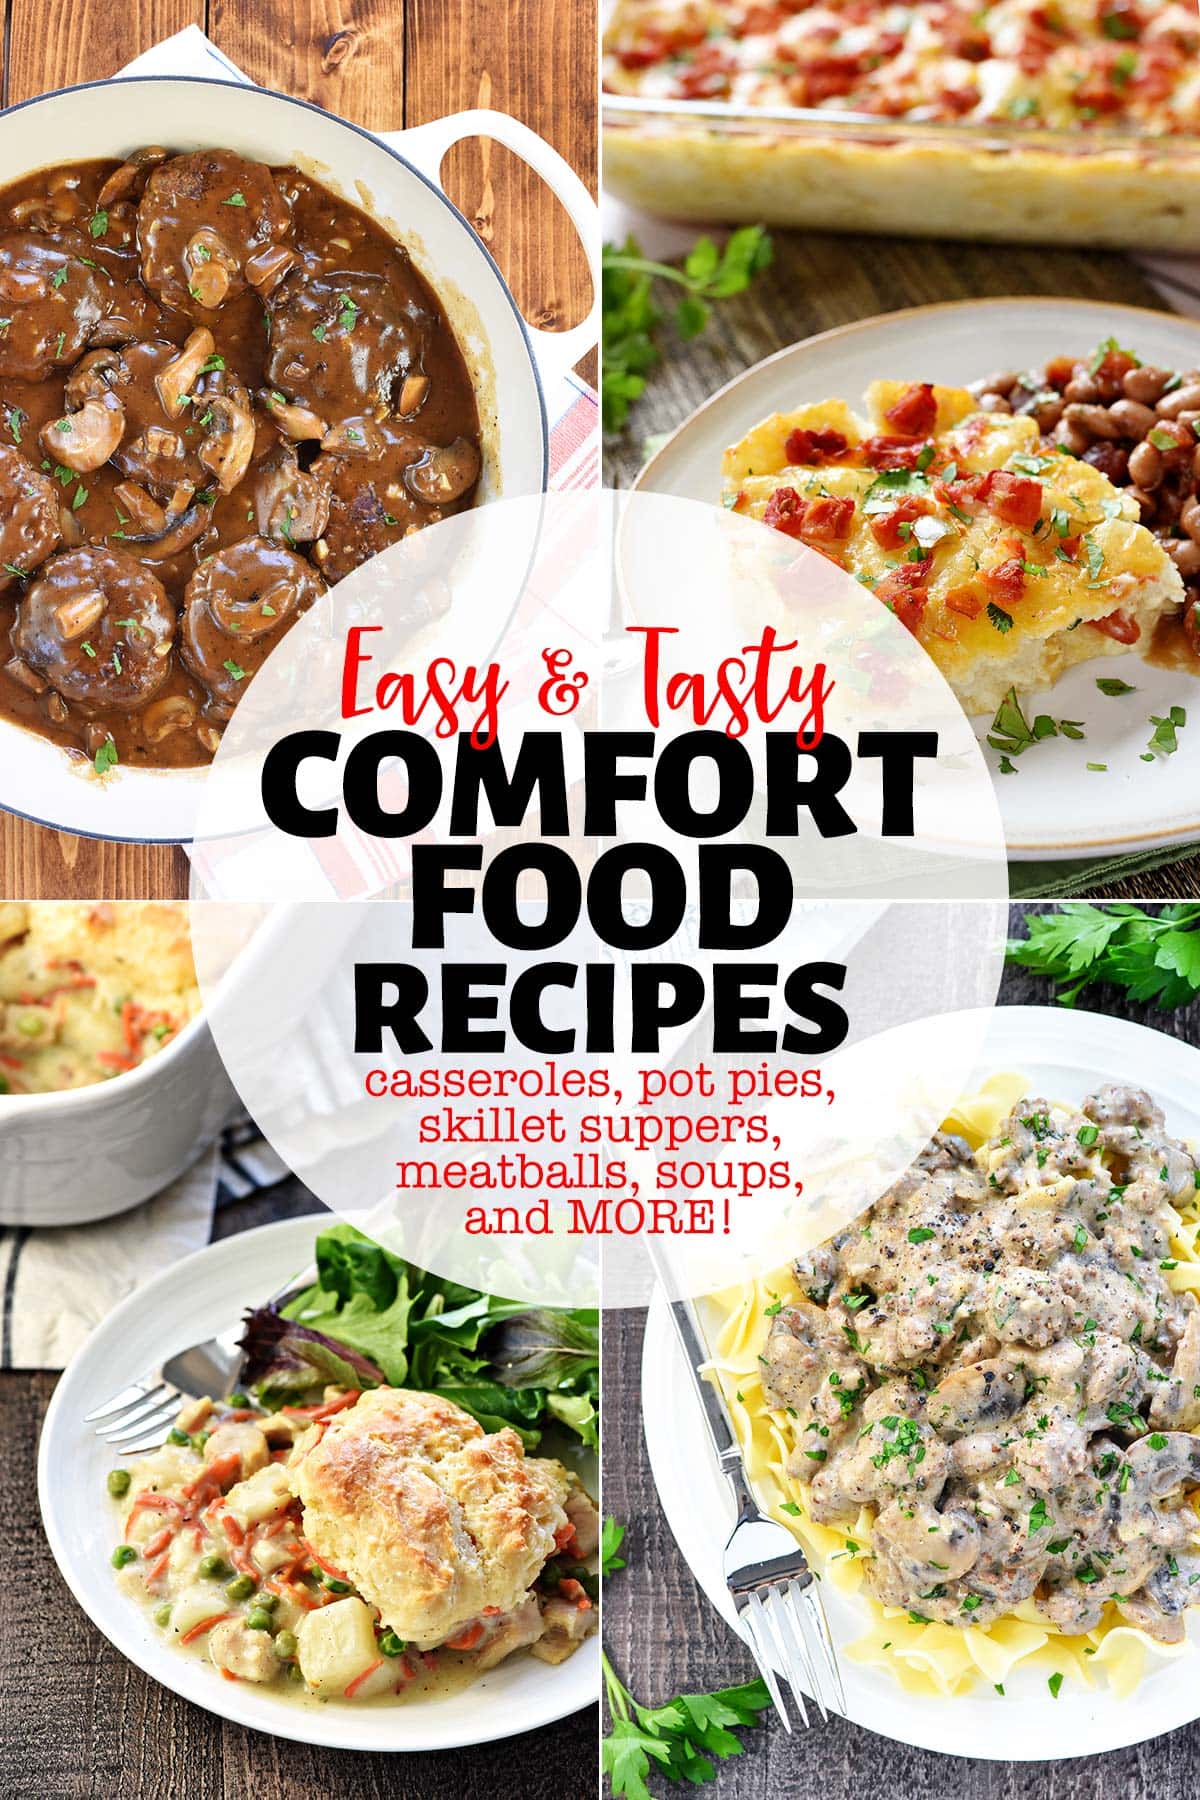 Comfort Food Recipes, four-photo collage with text showing delicious and easy recipes including casseroles, pot pies, skillet suppers, meatballs, soups, and more.